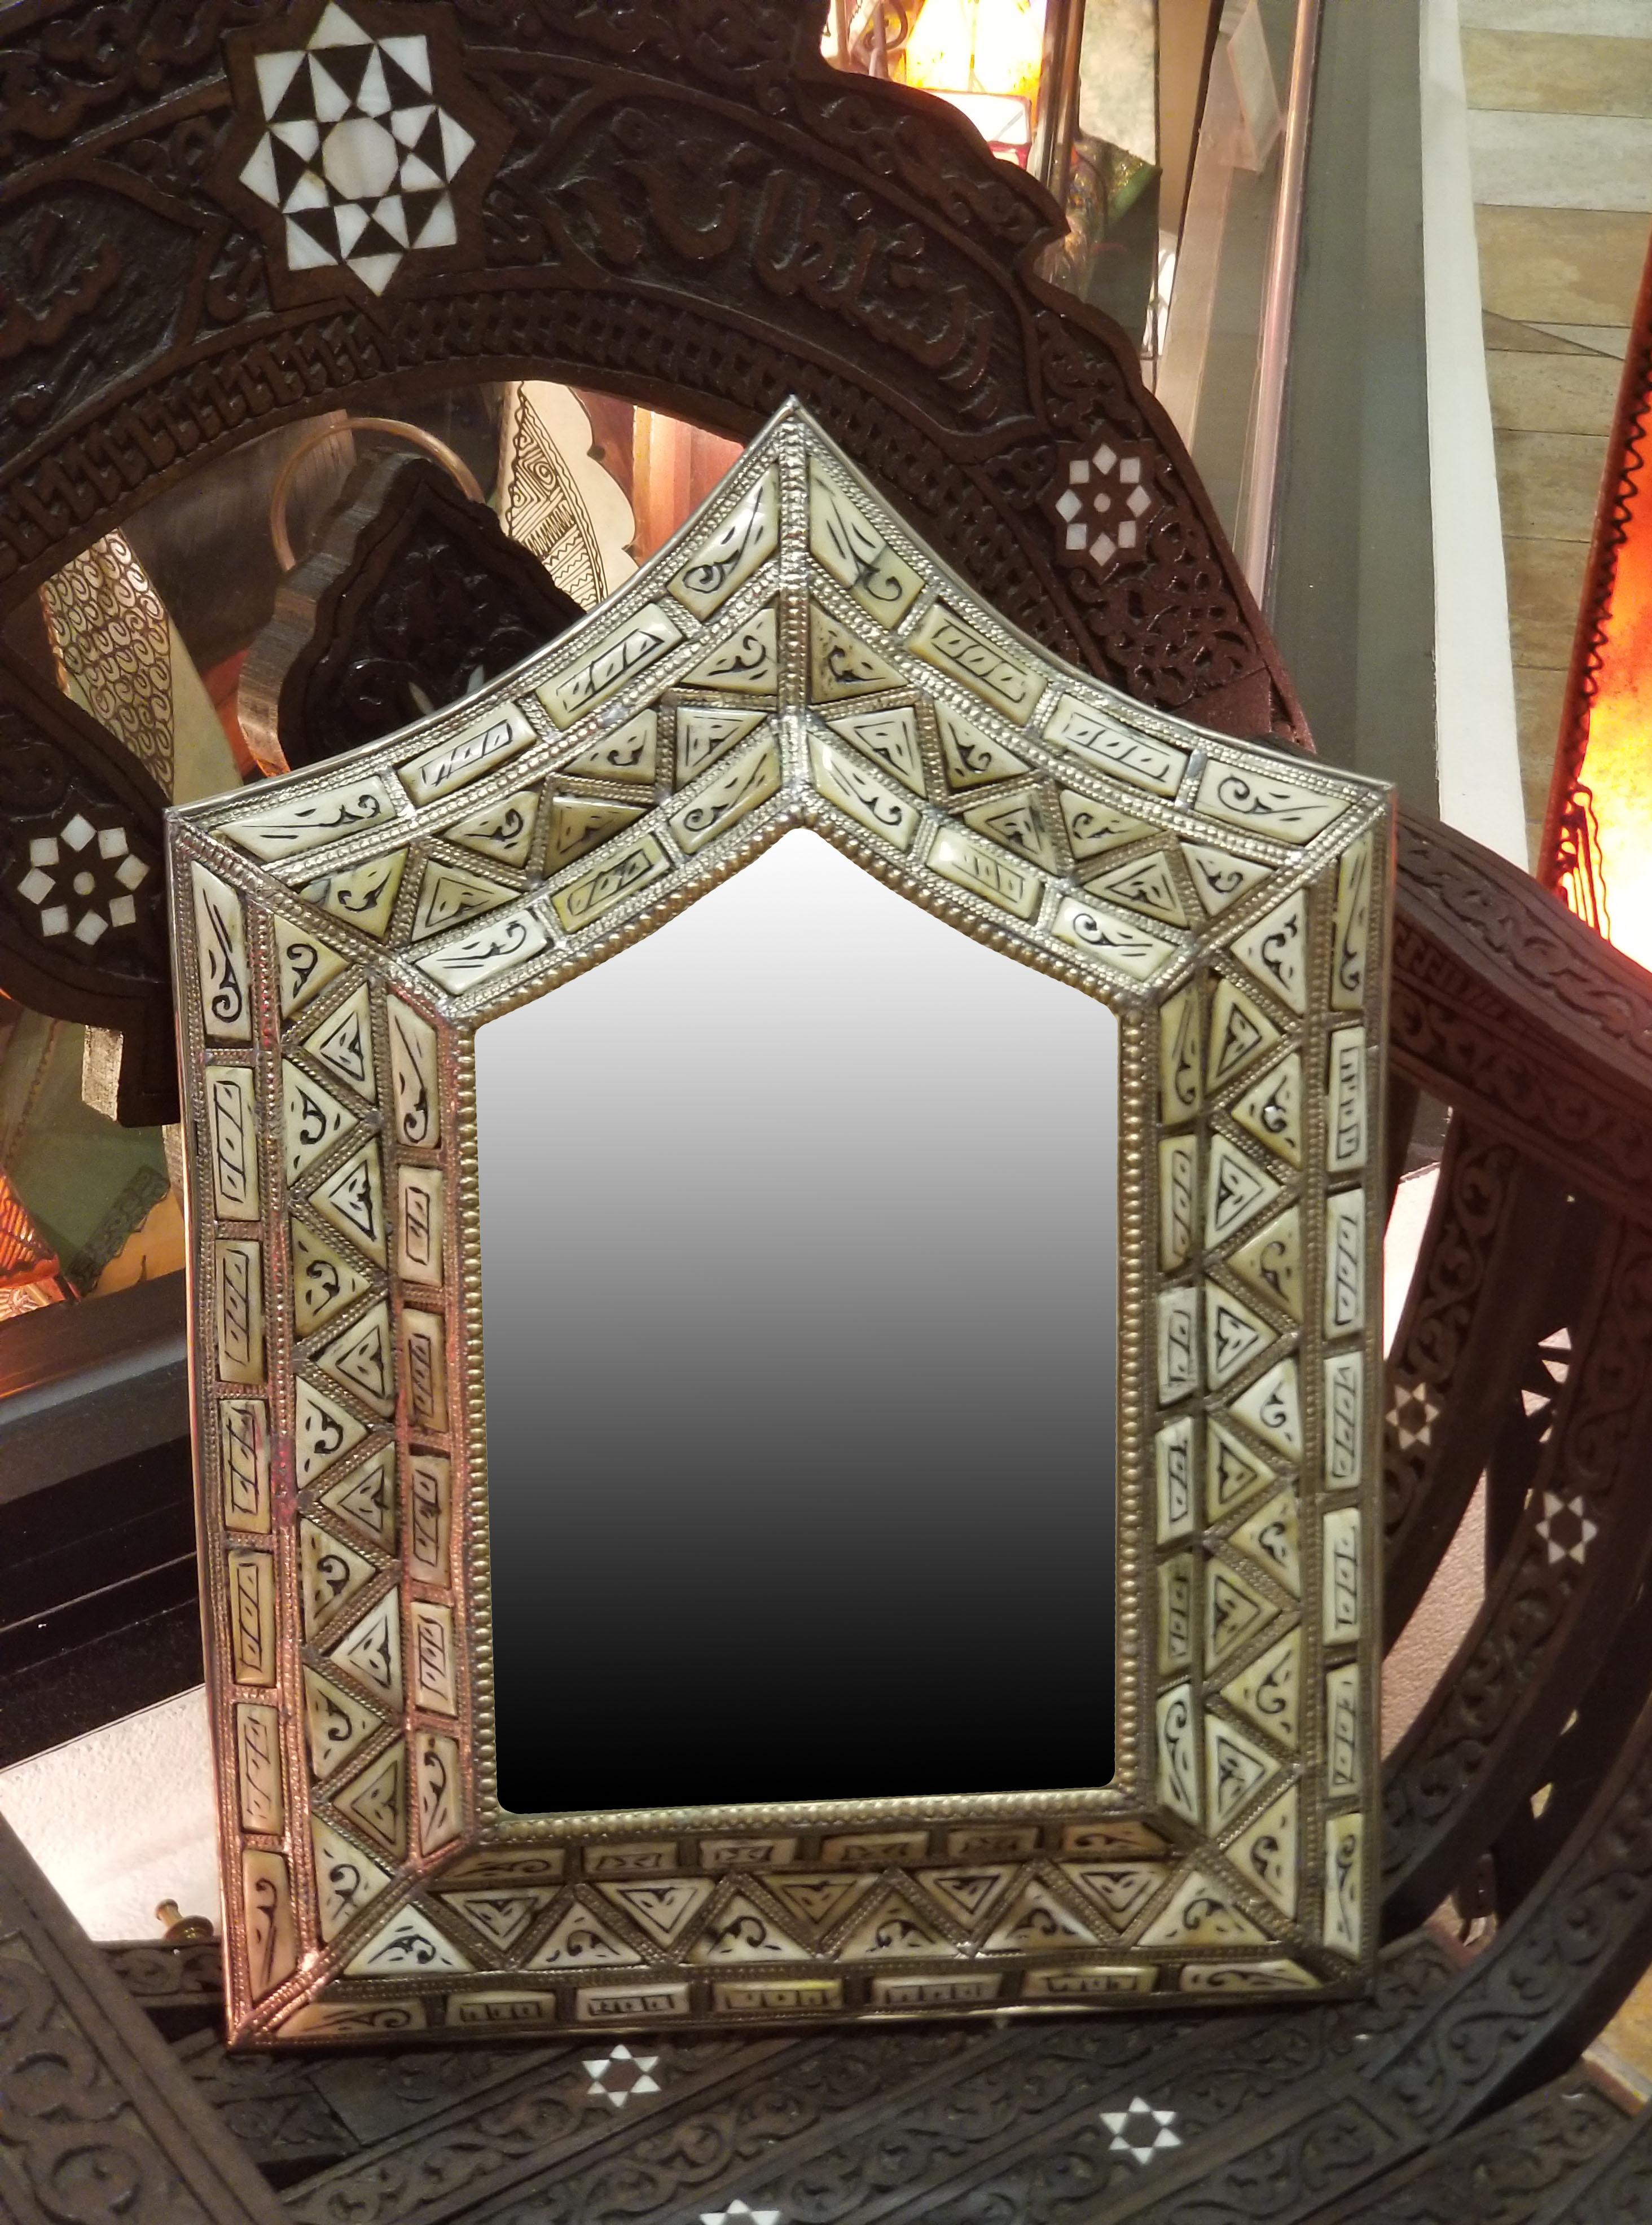 Medium size metal inlaid and camel bone Moroccan mirror. Made in the city of Marrakech. Arched shape measuring approximately 19